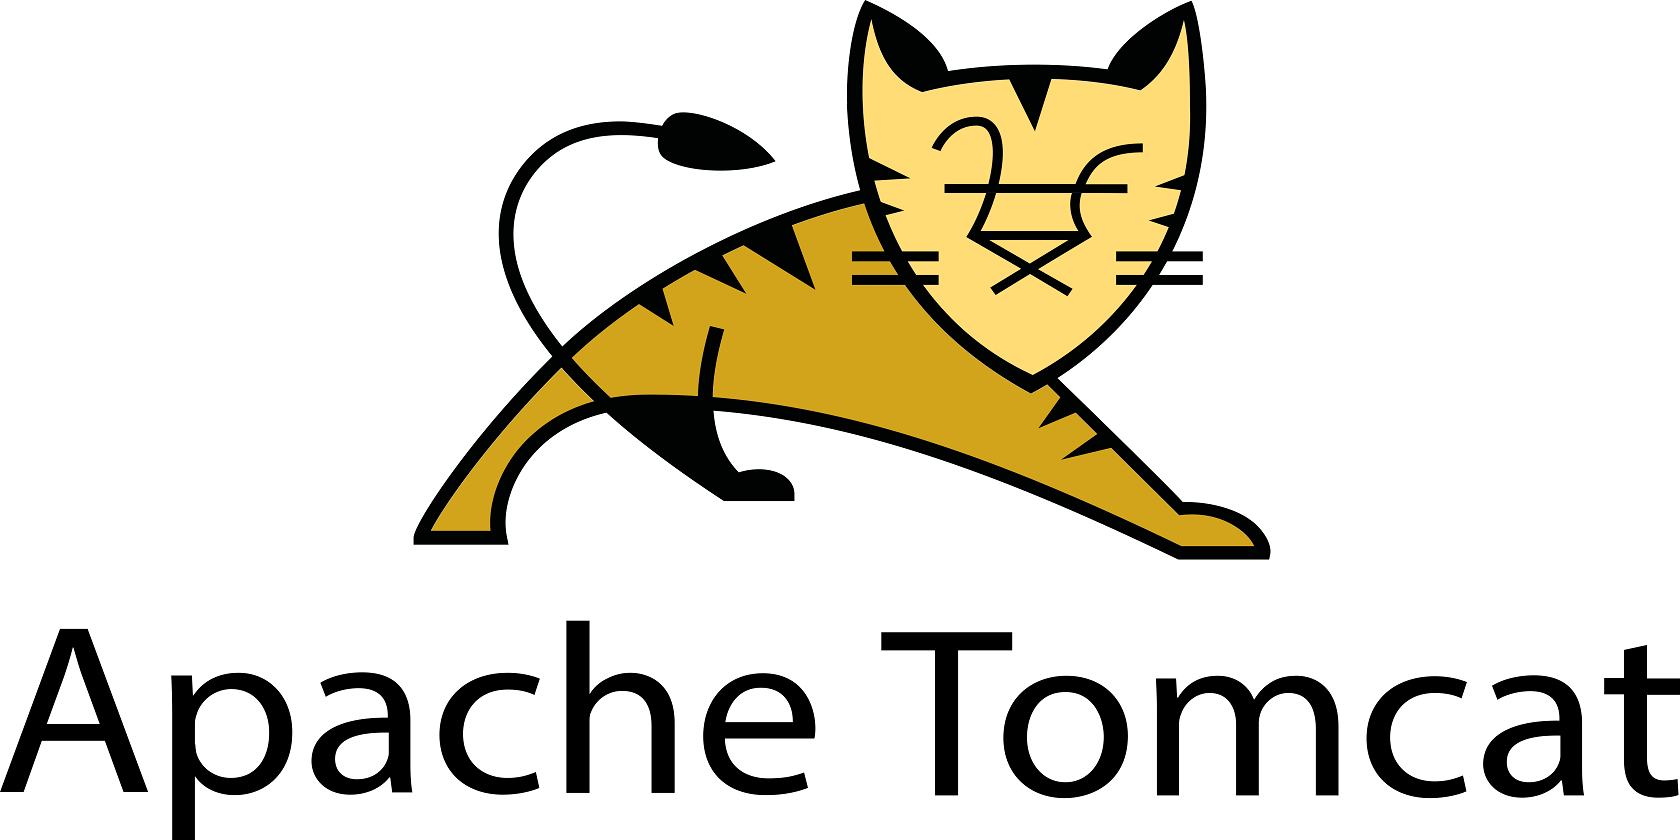 tomcat download for linux